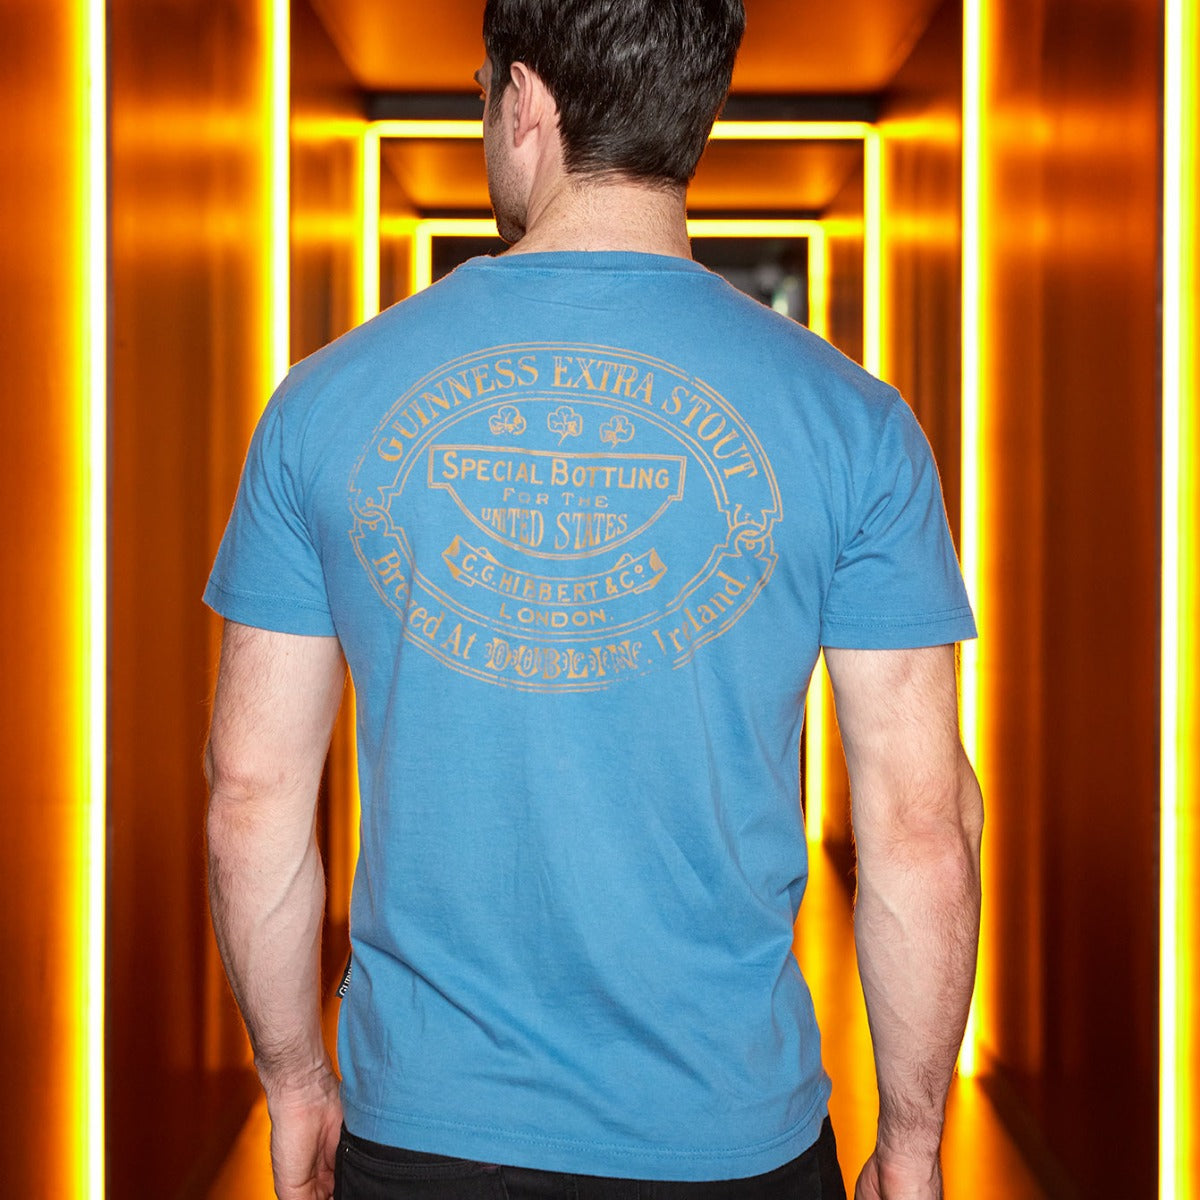 A man wearing a Sky Blue Guinness Harp Premium T-Shirt, made by Guinness UK, standing in a hallway.